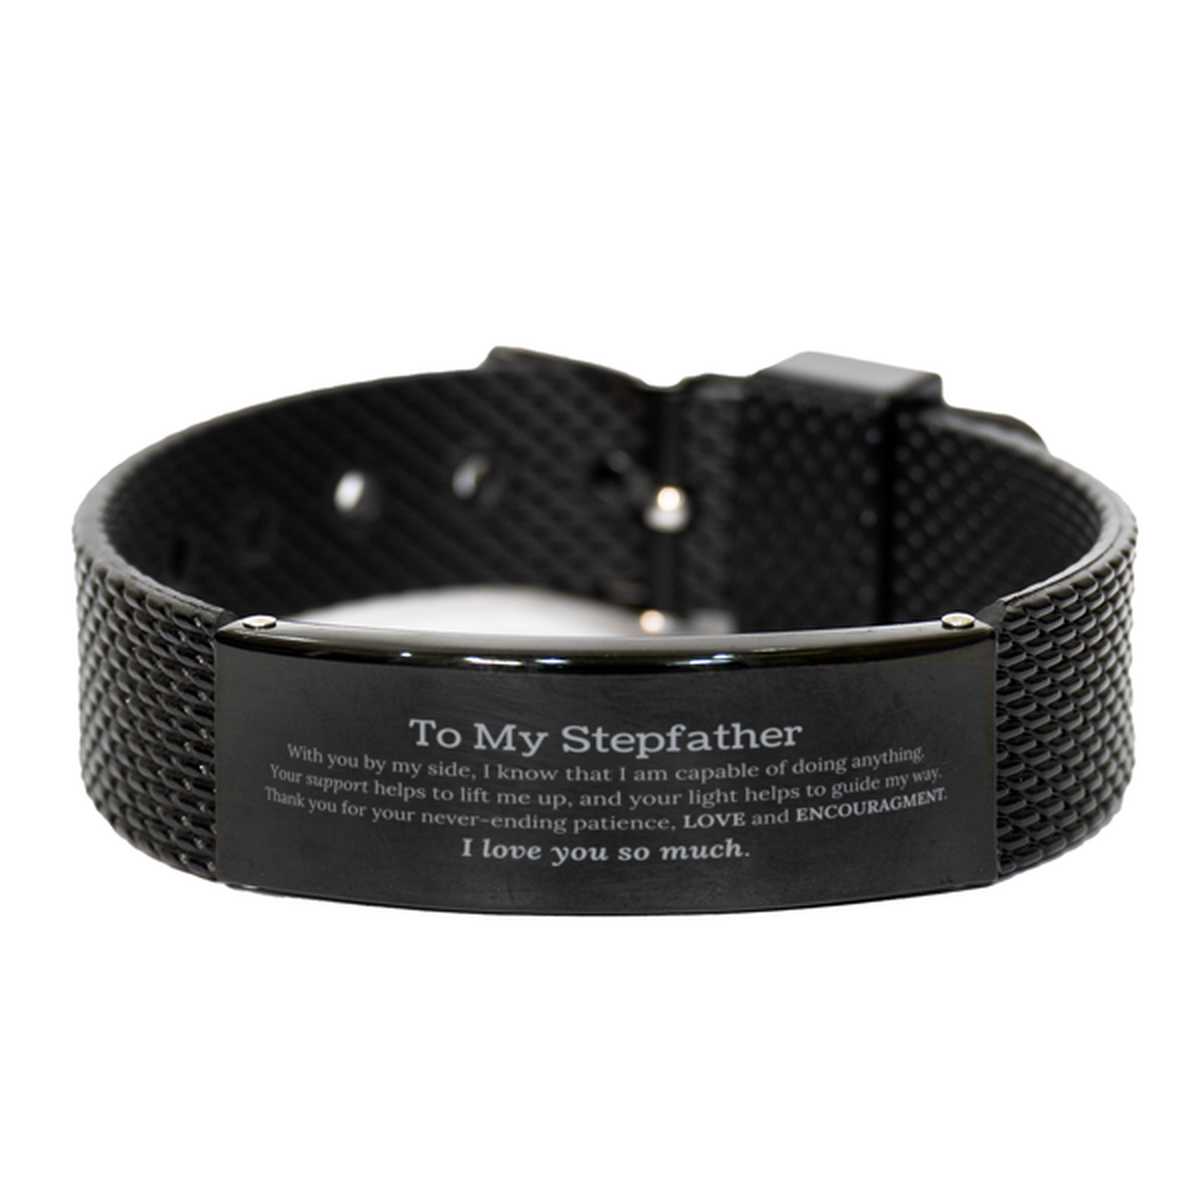 Appreciation Stepfather Black Shark Mesh Bracelet Gifts, To My Stepfather Birthday Christmas Wedding Keepsake Gifts for Stepfather With you by my side, I know that I am capable of doing anything. I love you so much